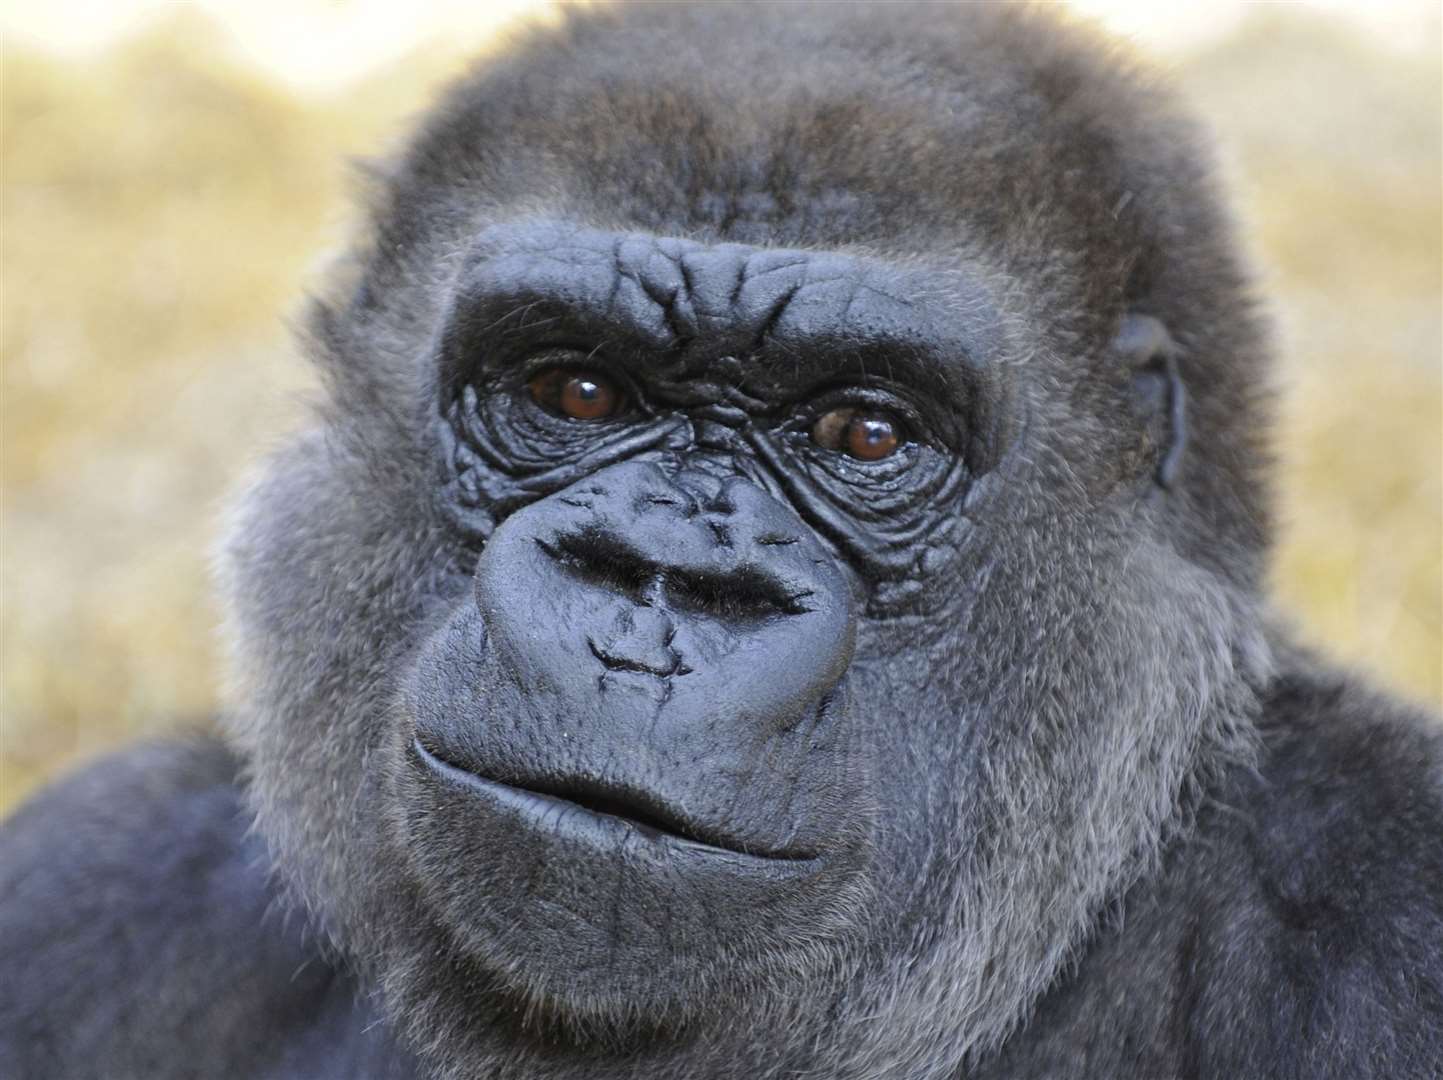 Gorillas at the old enclosure at Howletts have not been seen by the public since March 2020